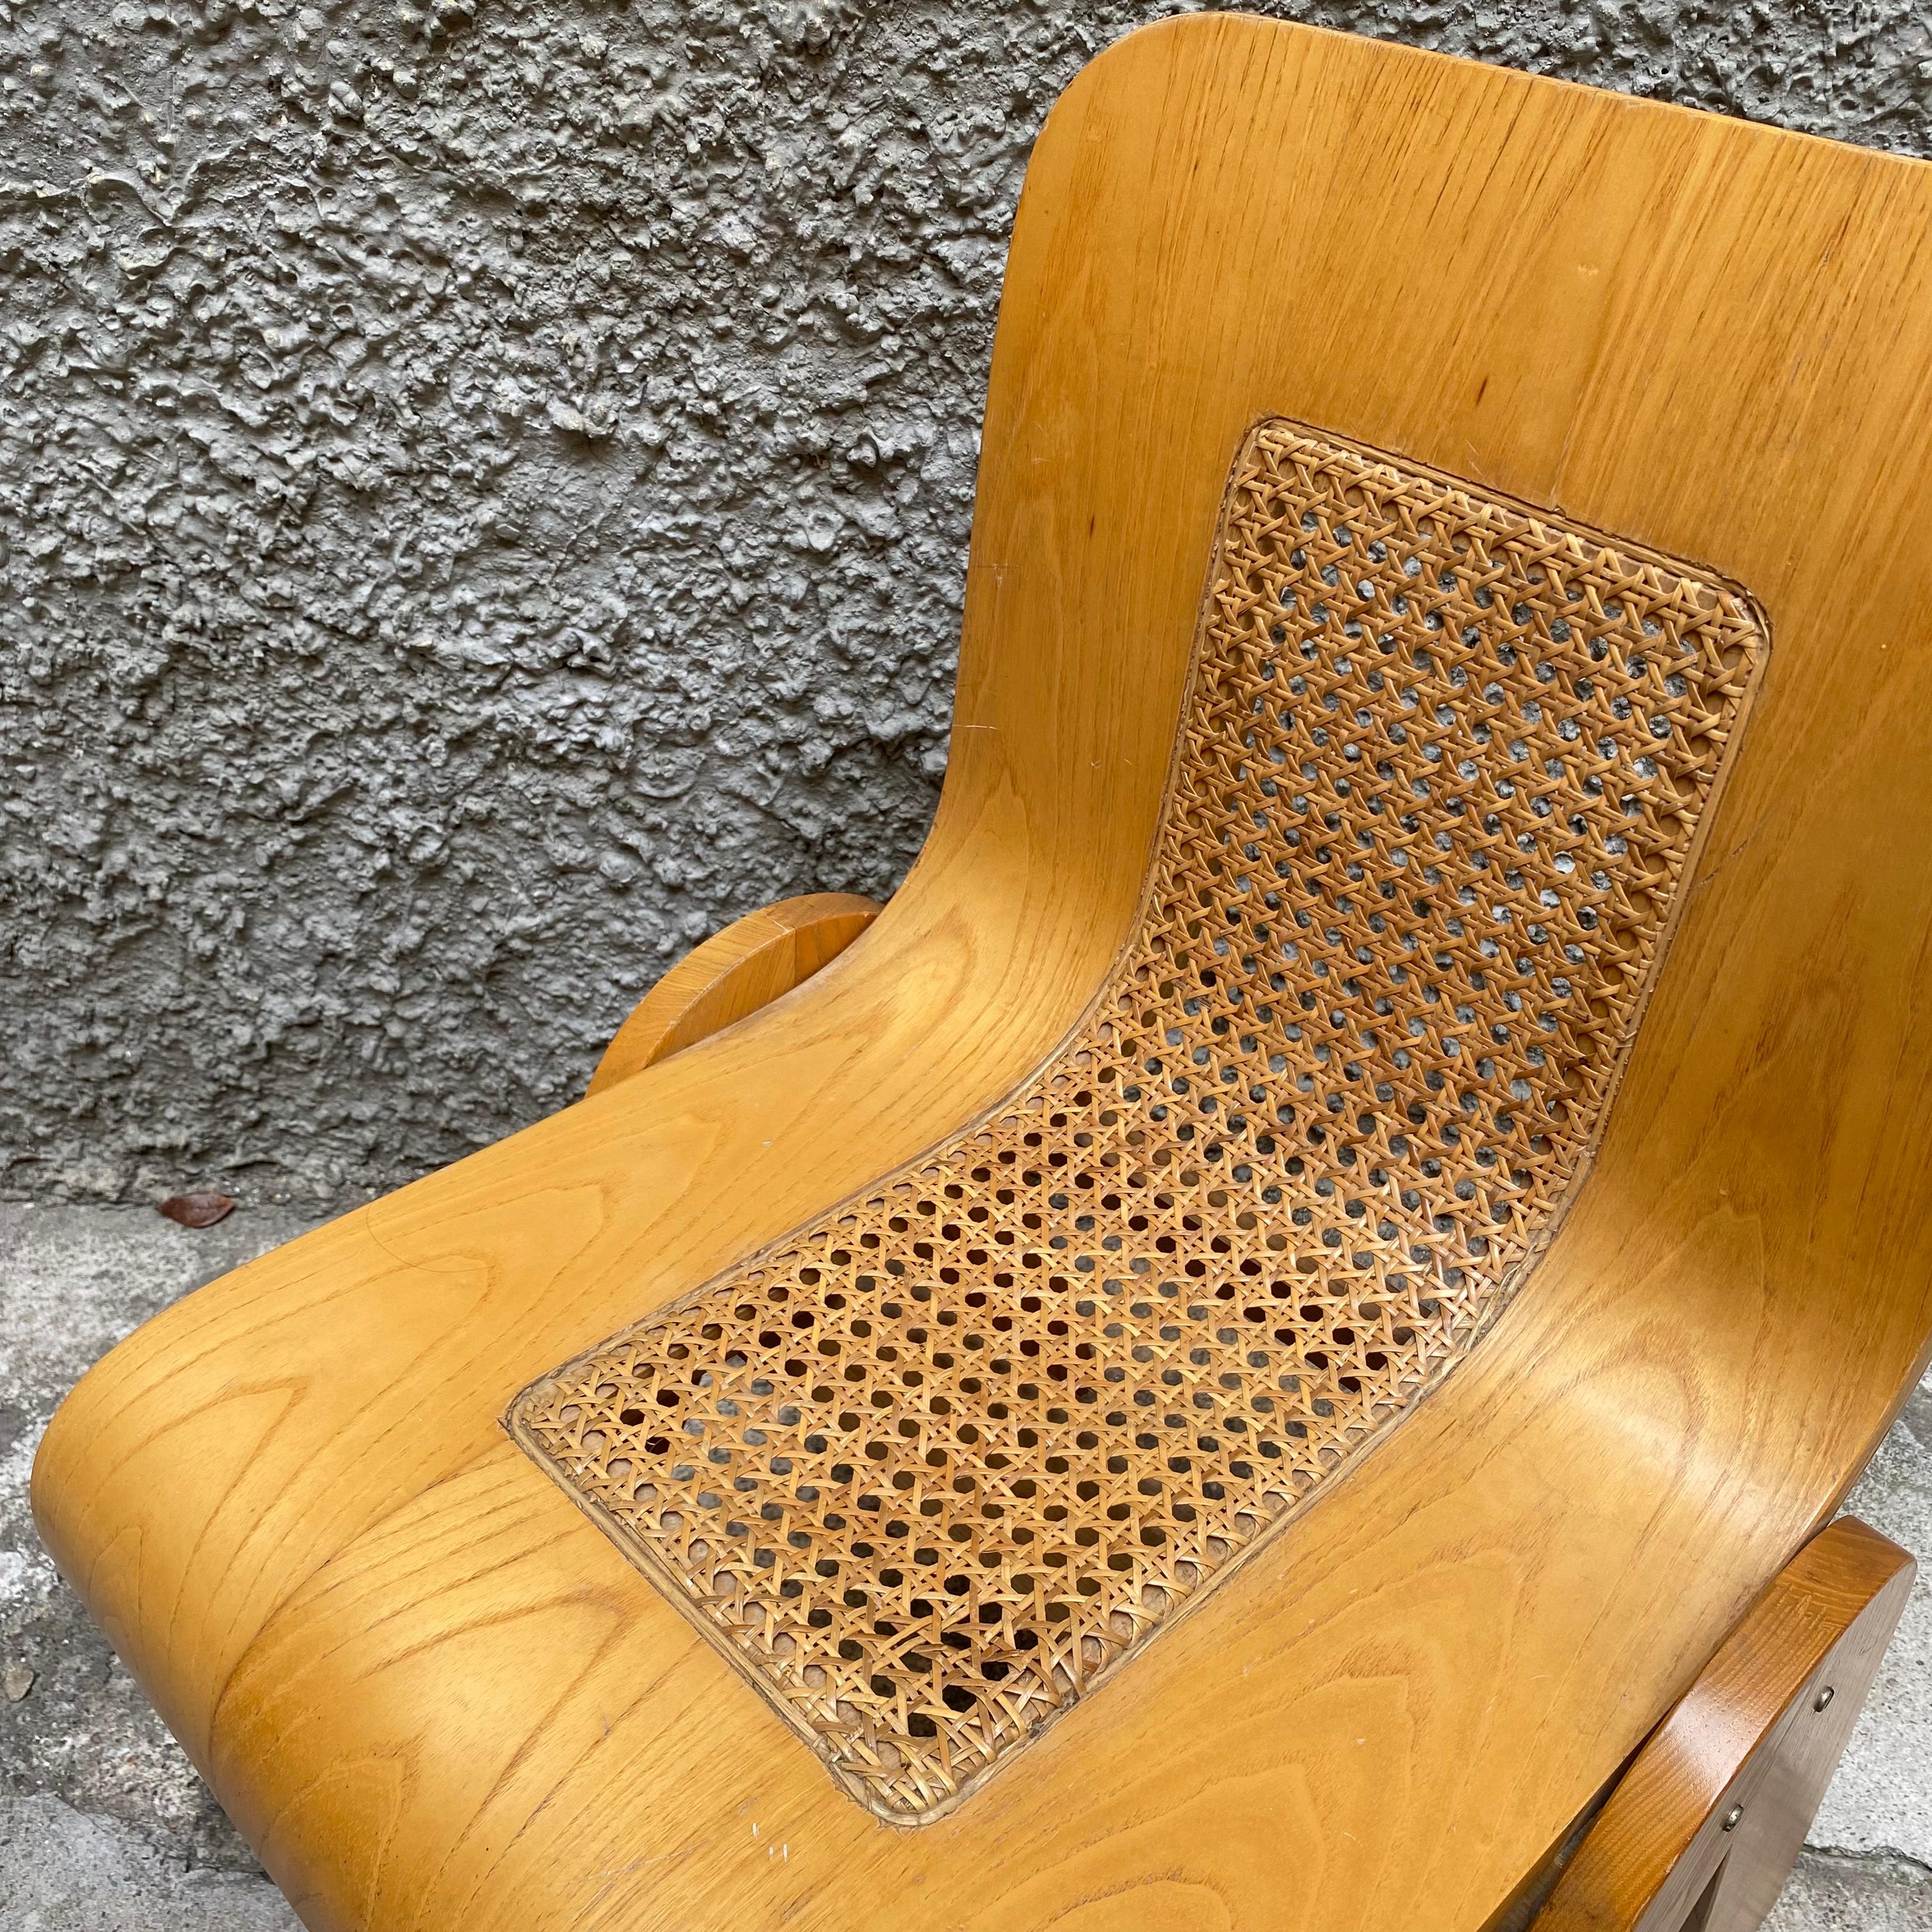 An inventive design by the Italian Gigi Sabadin, this chair is made of bent plywood with a veneered finish. The organic design seems to be made of one piece, which is cut and bent. The backrest features an open space adding extra lightness to the